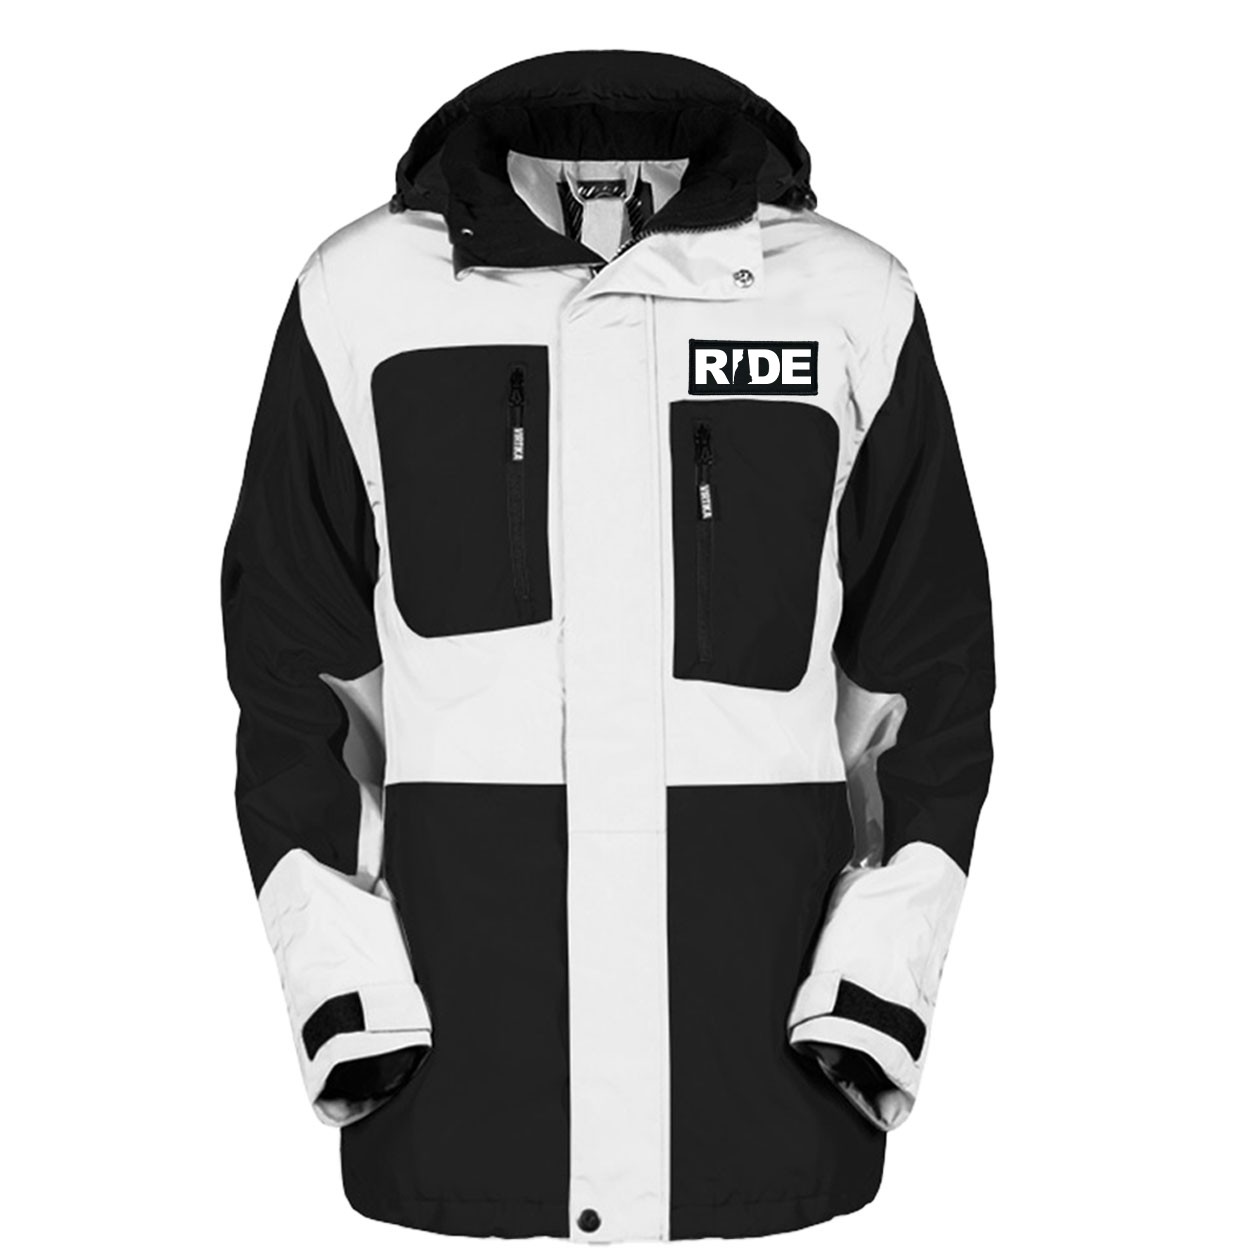 Ride New Hampshire Classic Woven Patch Pro Snowboard Jacket (Black/White)